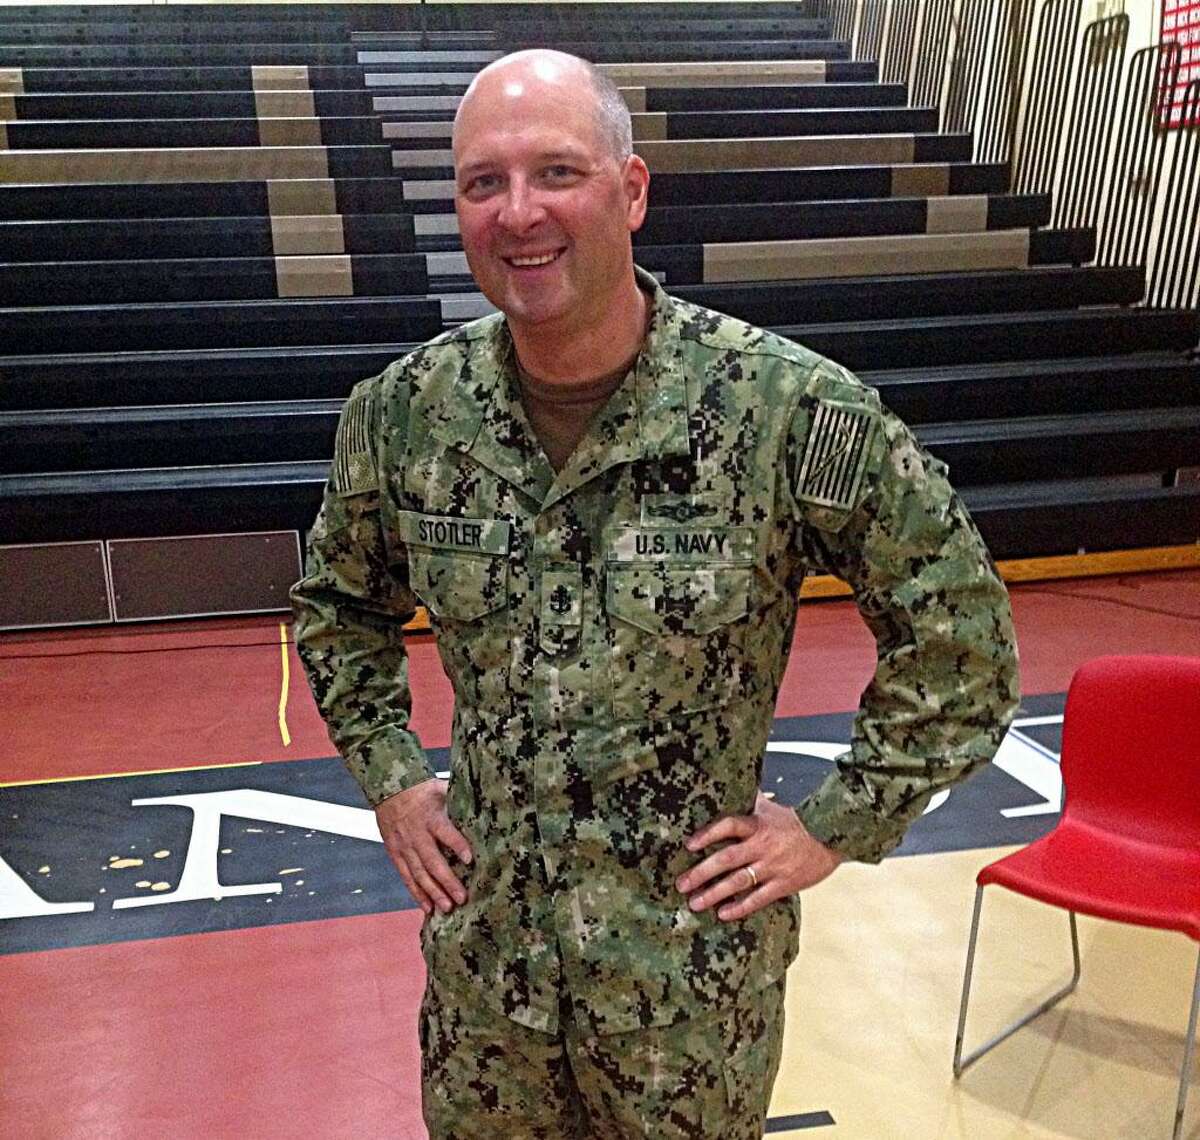 Twenty-year social studies teacher Chief Navy Petty Officer James Stotler, is also the varsity boys’ soccer coach. He was welcomed home at Portland High School this week.